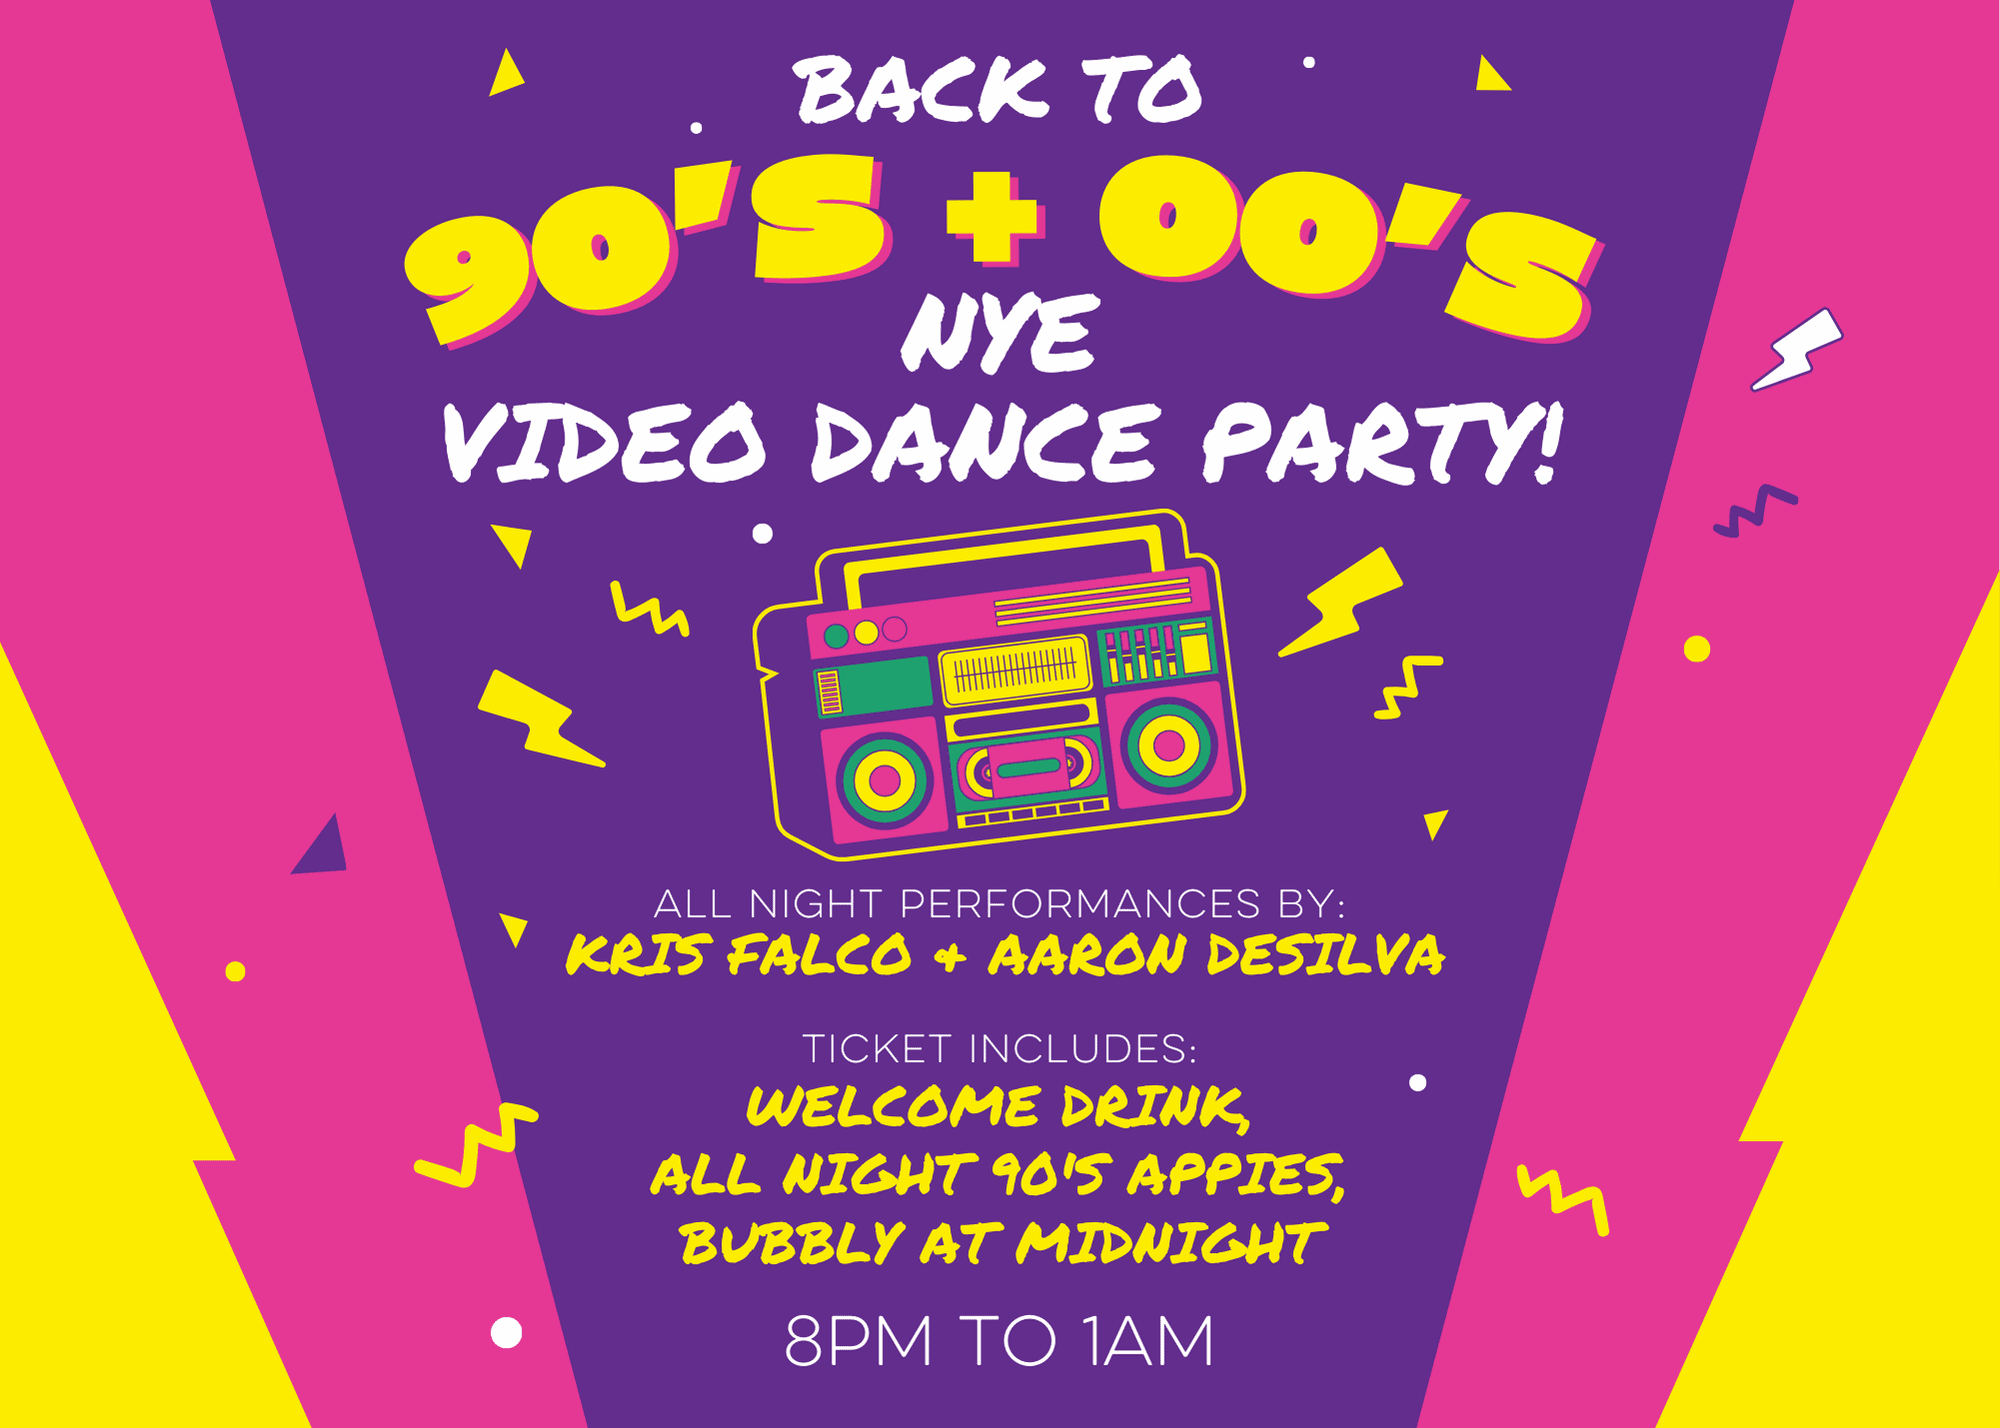 back to 90s nye party red bird brewing